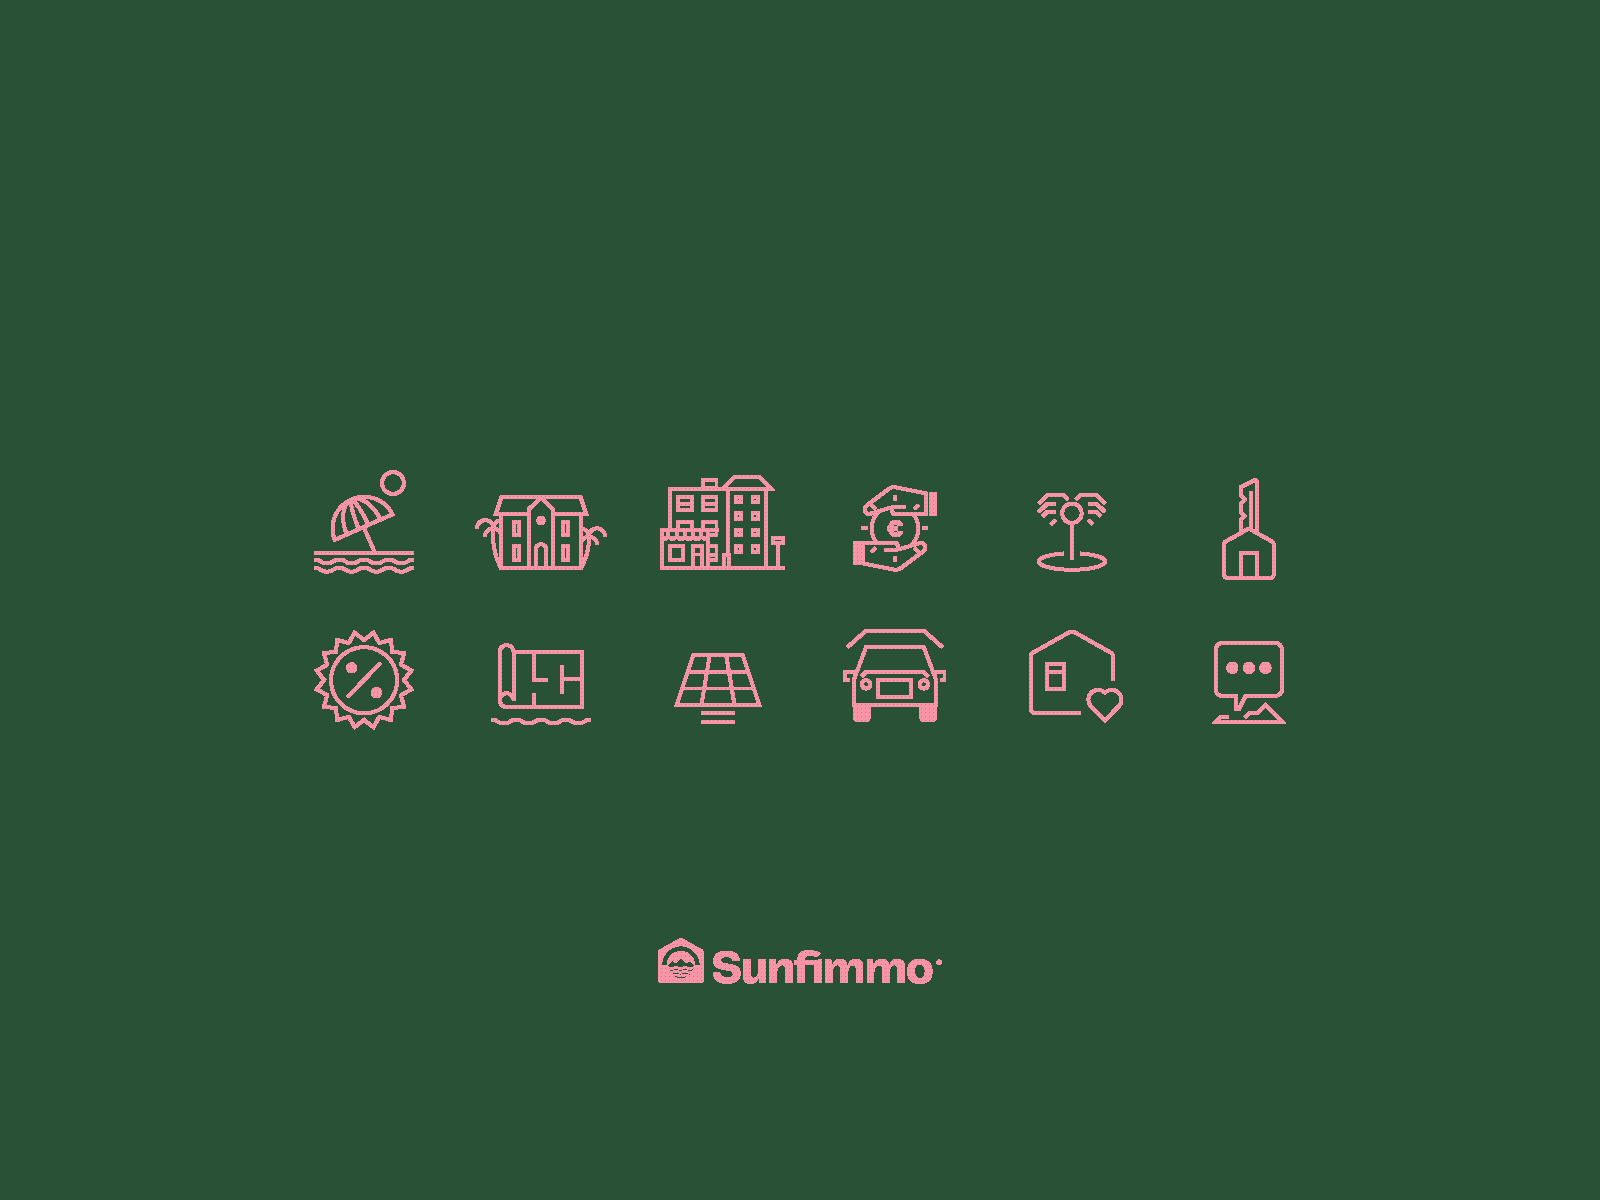 Sunfimmo: icon system brand branding graphic design grid house icon icon design icon set iconography icons identity luxury outline icons real state sunfimmo sytem ui ux vectors